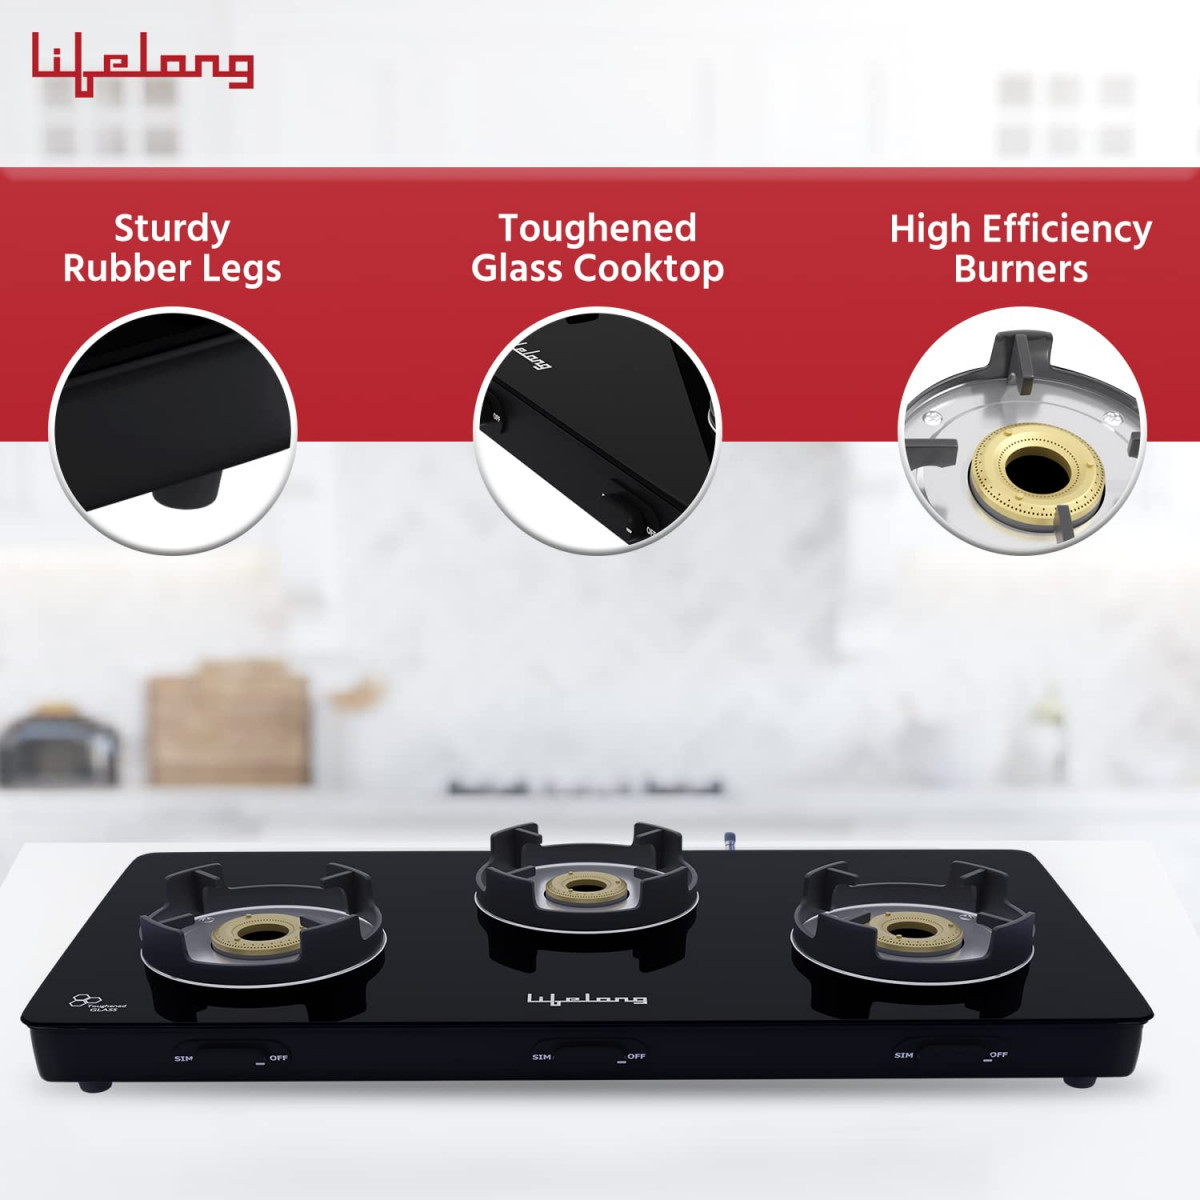 Lifelong LLGS50 Acer Manual Ignition High Efficiency 3 Burner Premium Gas Stove with Toughened Glass Top ISI Certified For LPG Use 1 Year Warranty Doorstep Service Black